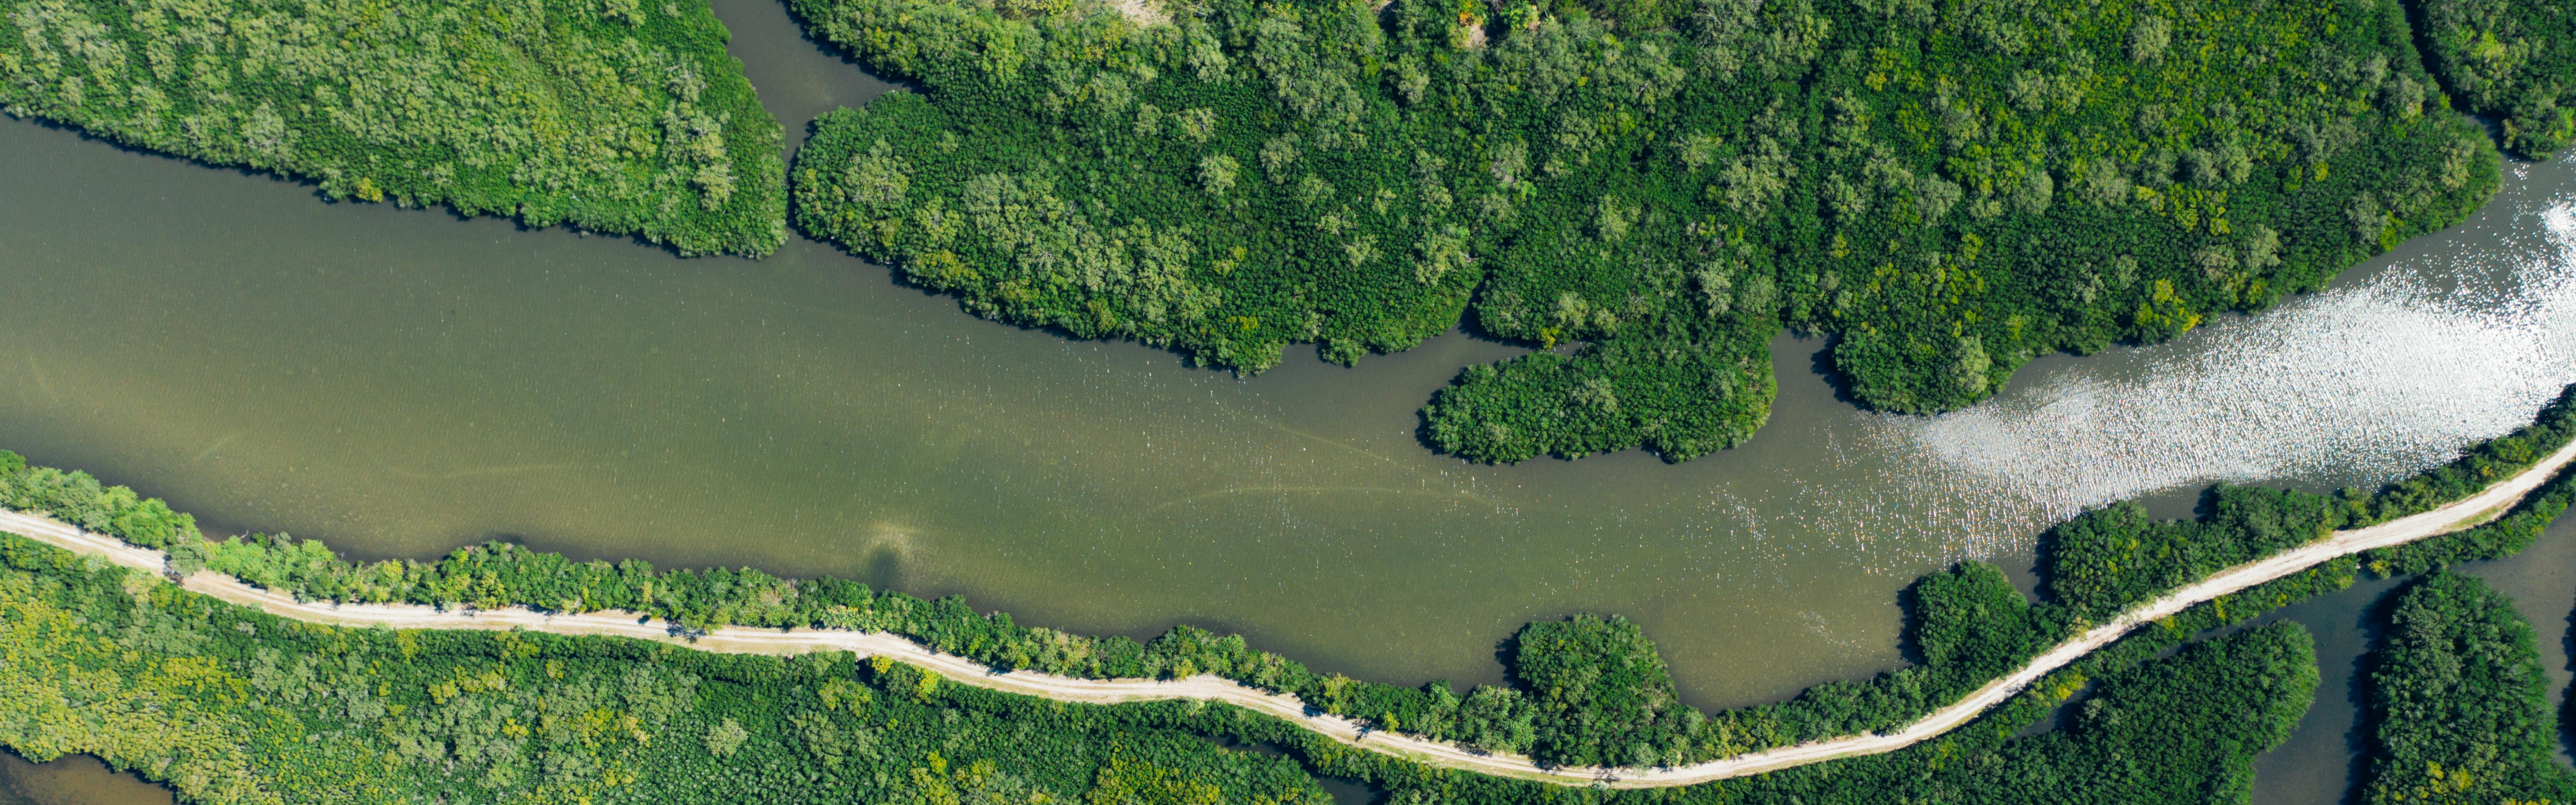 Aerial photo of a river. There are trees all around it and a road visible that follows the river.